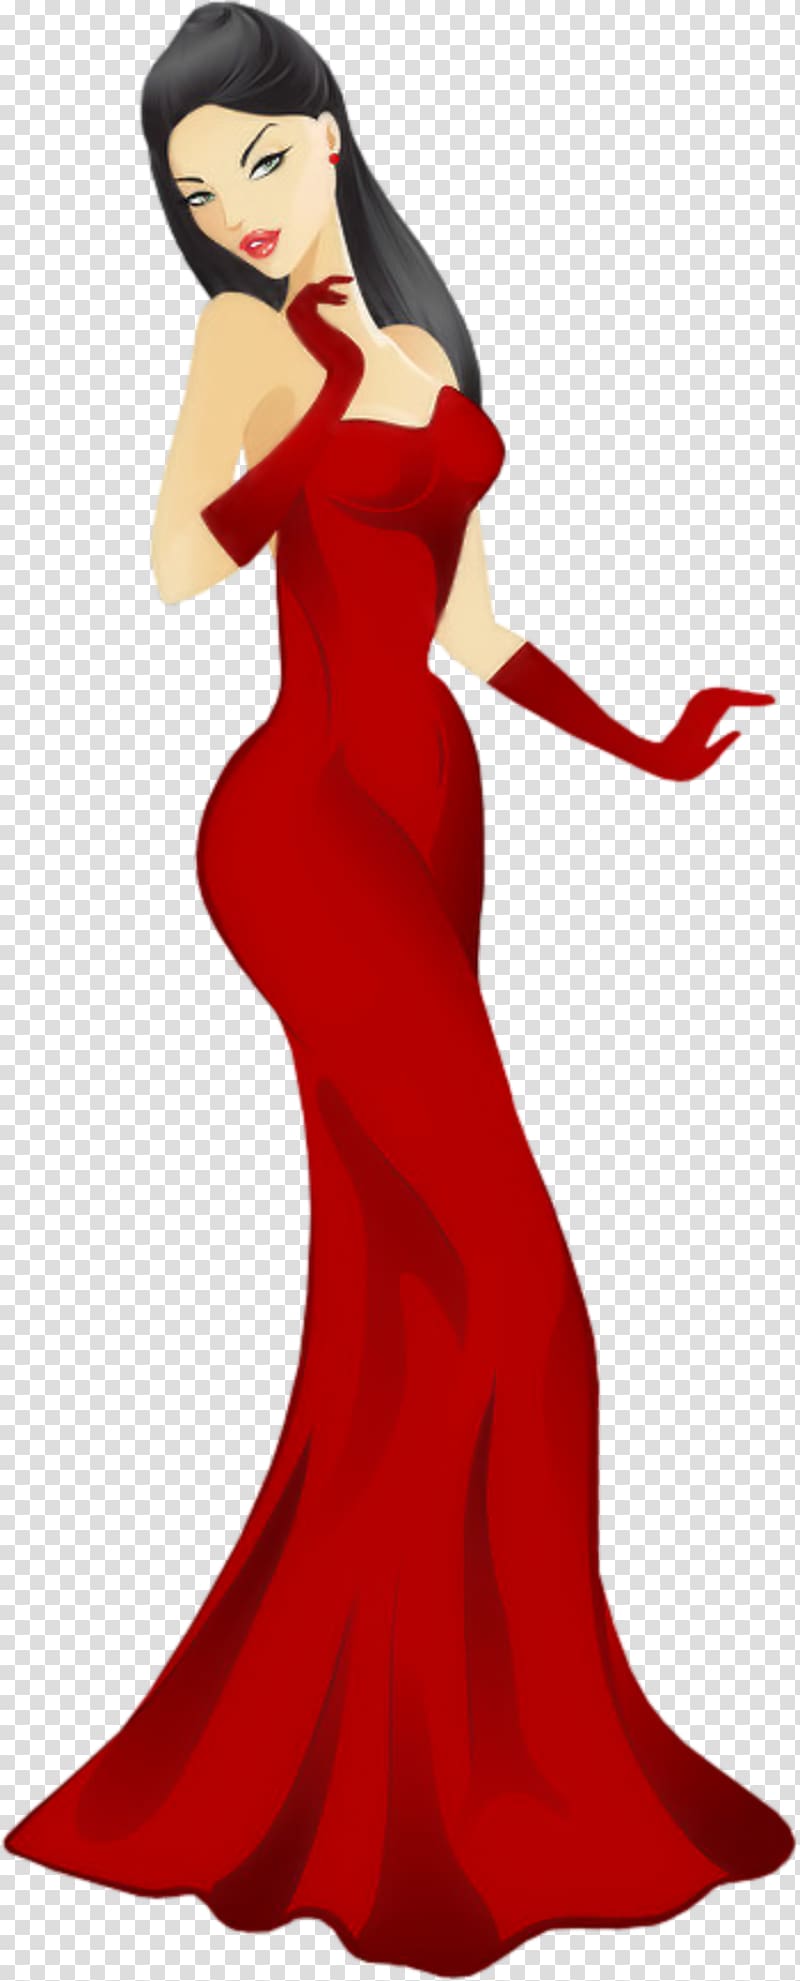 Sabah Betty Boop Cartoon, lady in gown transparent background PNG clipart